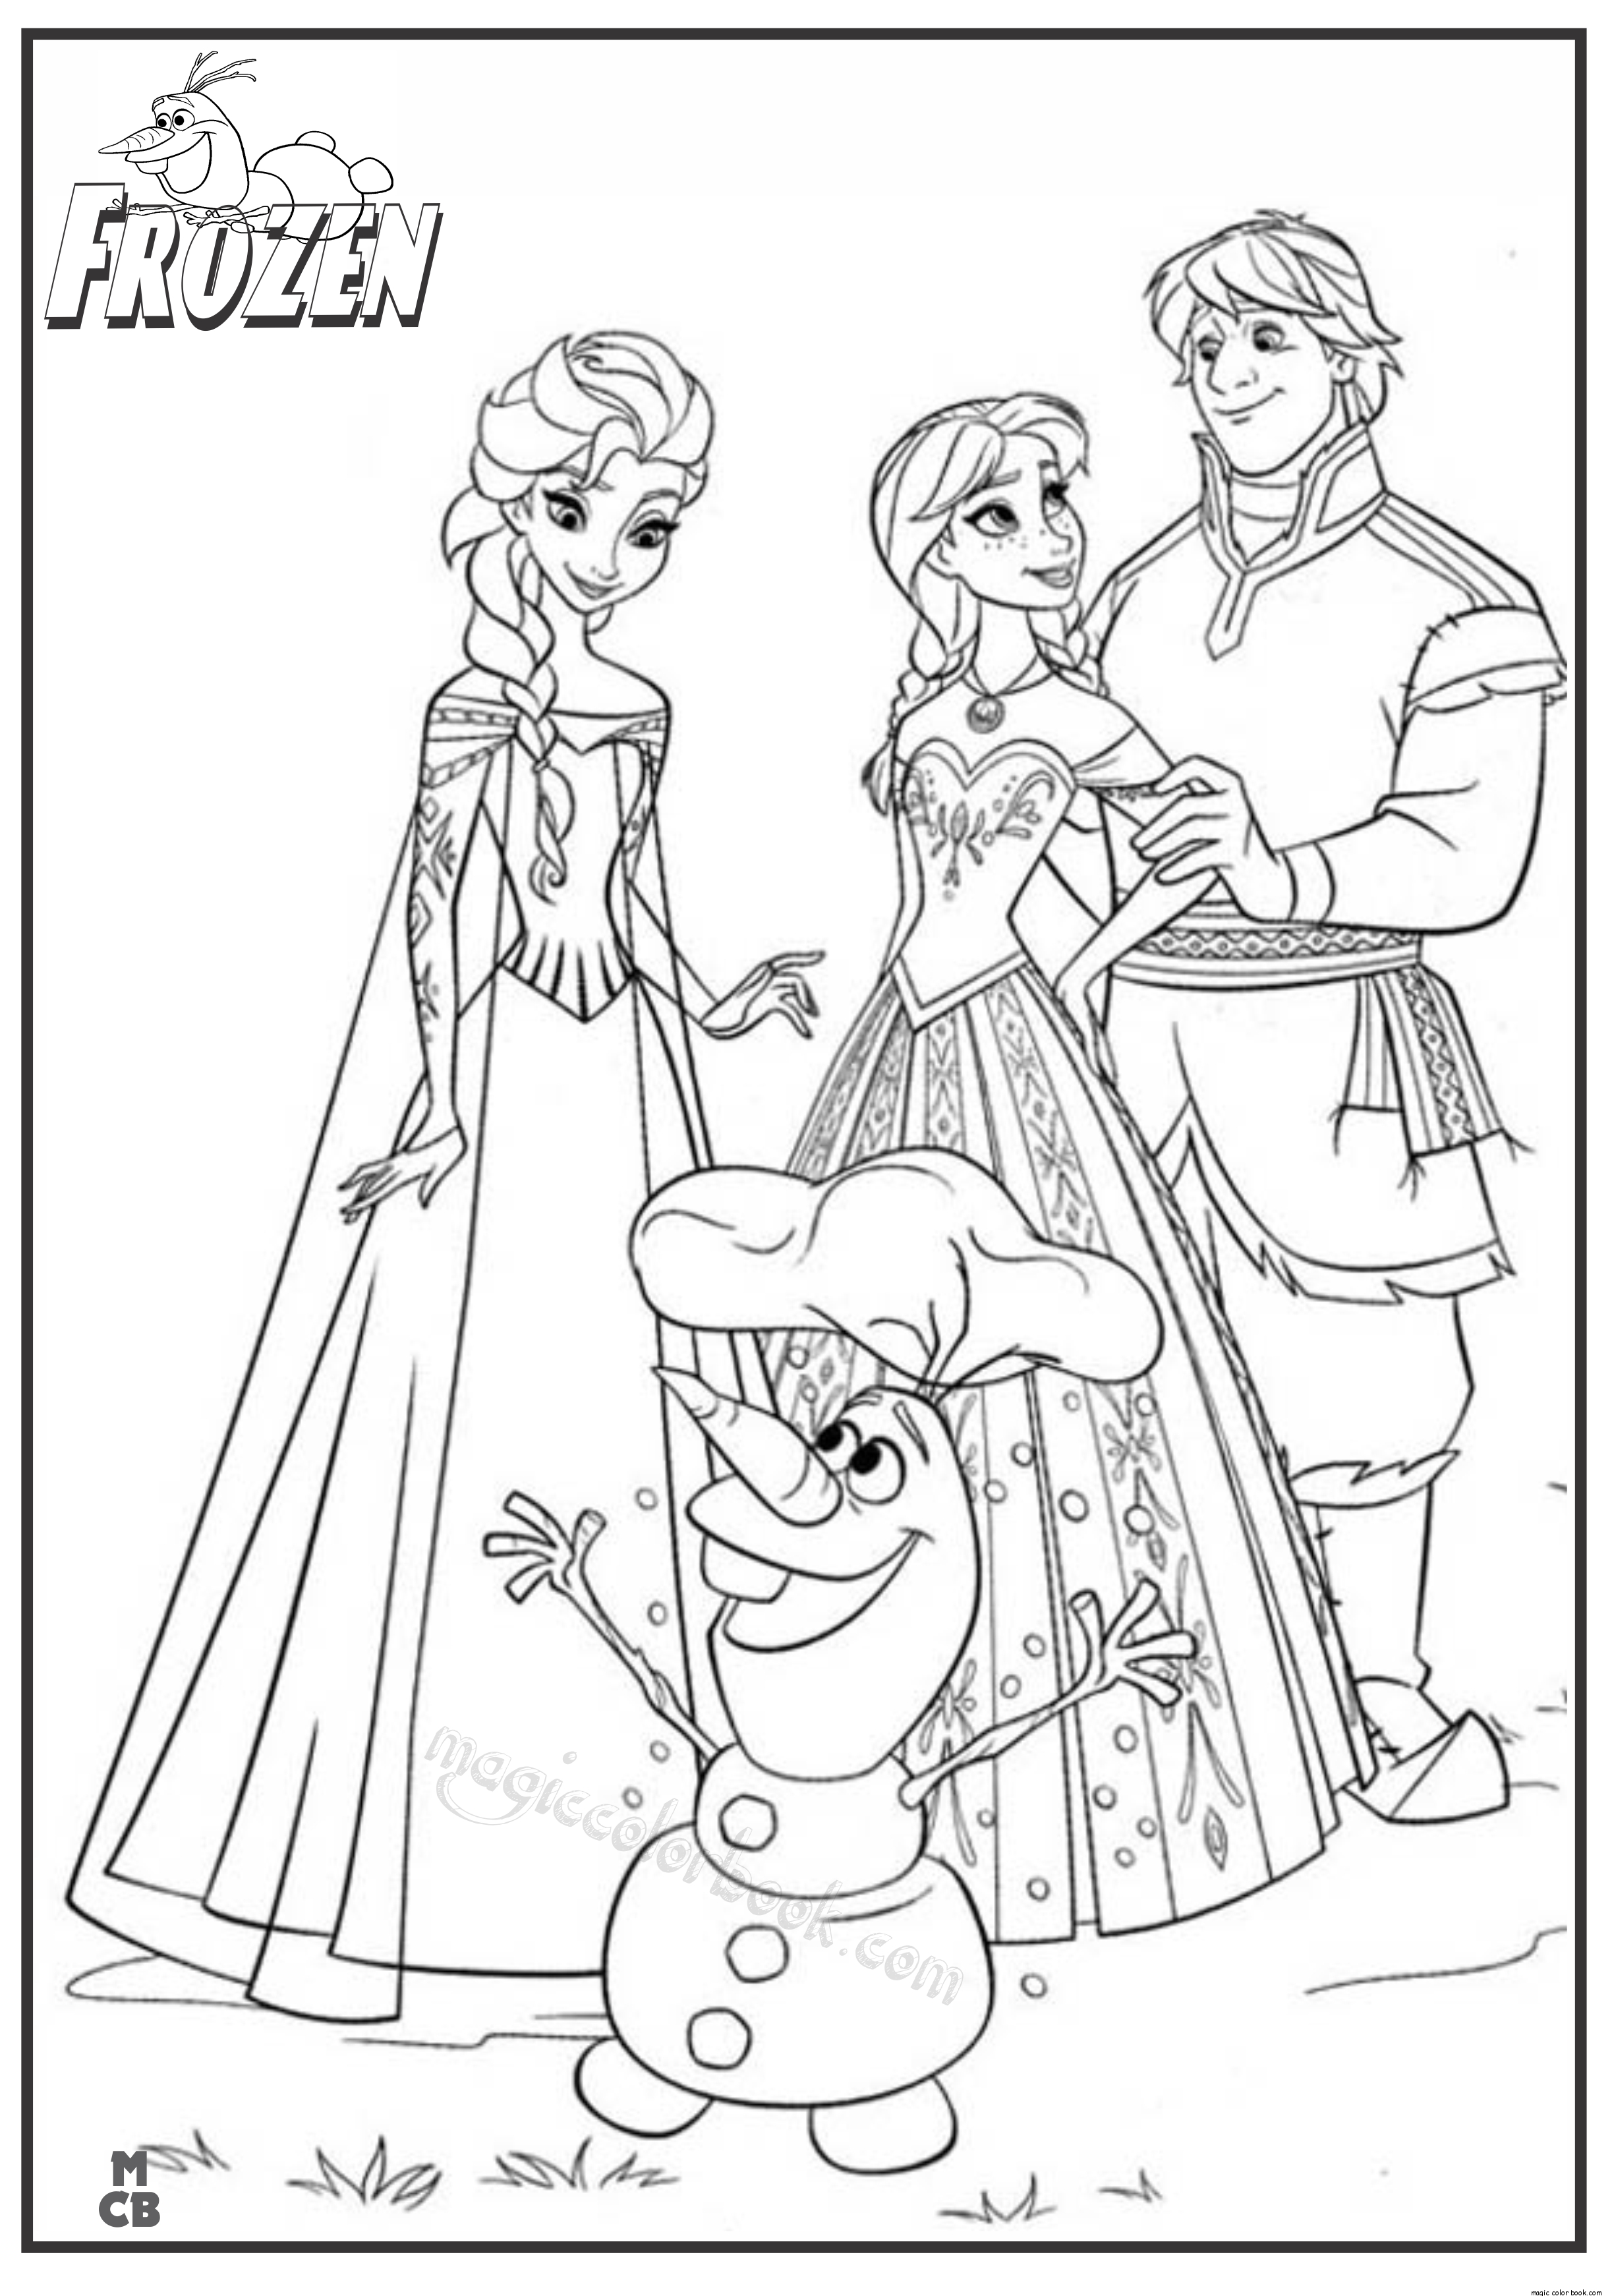 Frozen Coloring Page - Coloring Home - Free Printable Frozen Coloring Pages